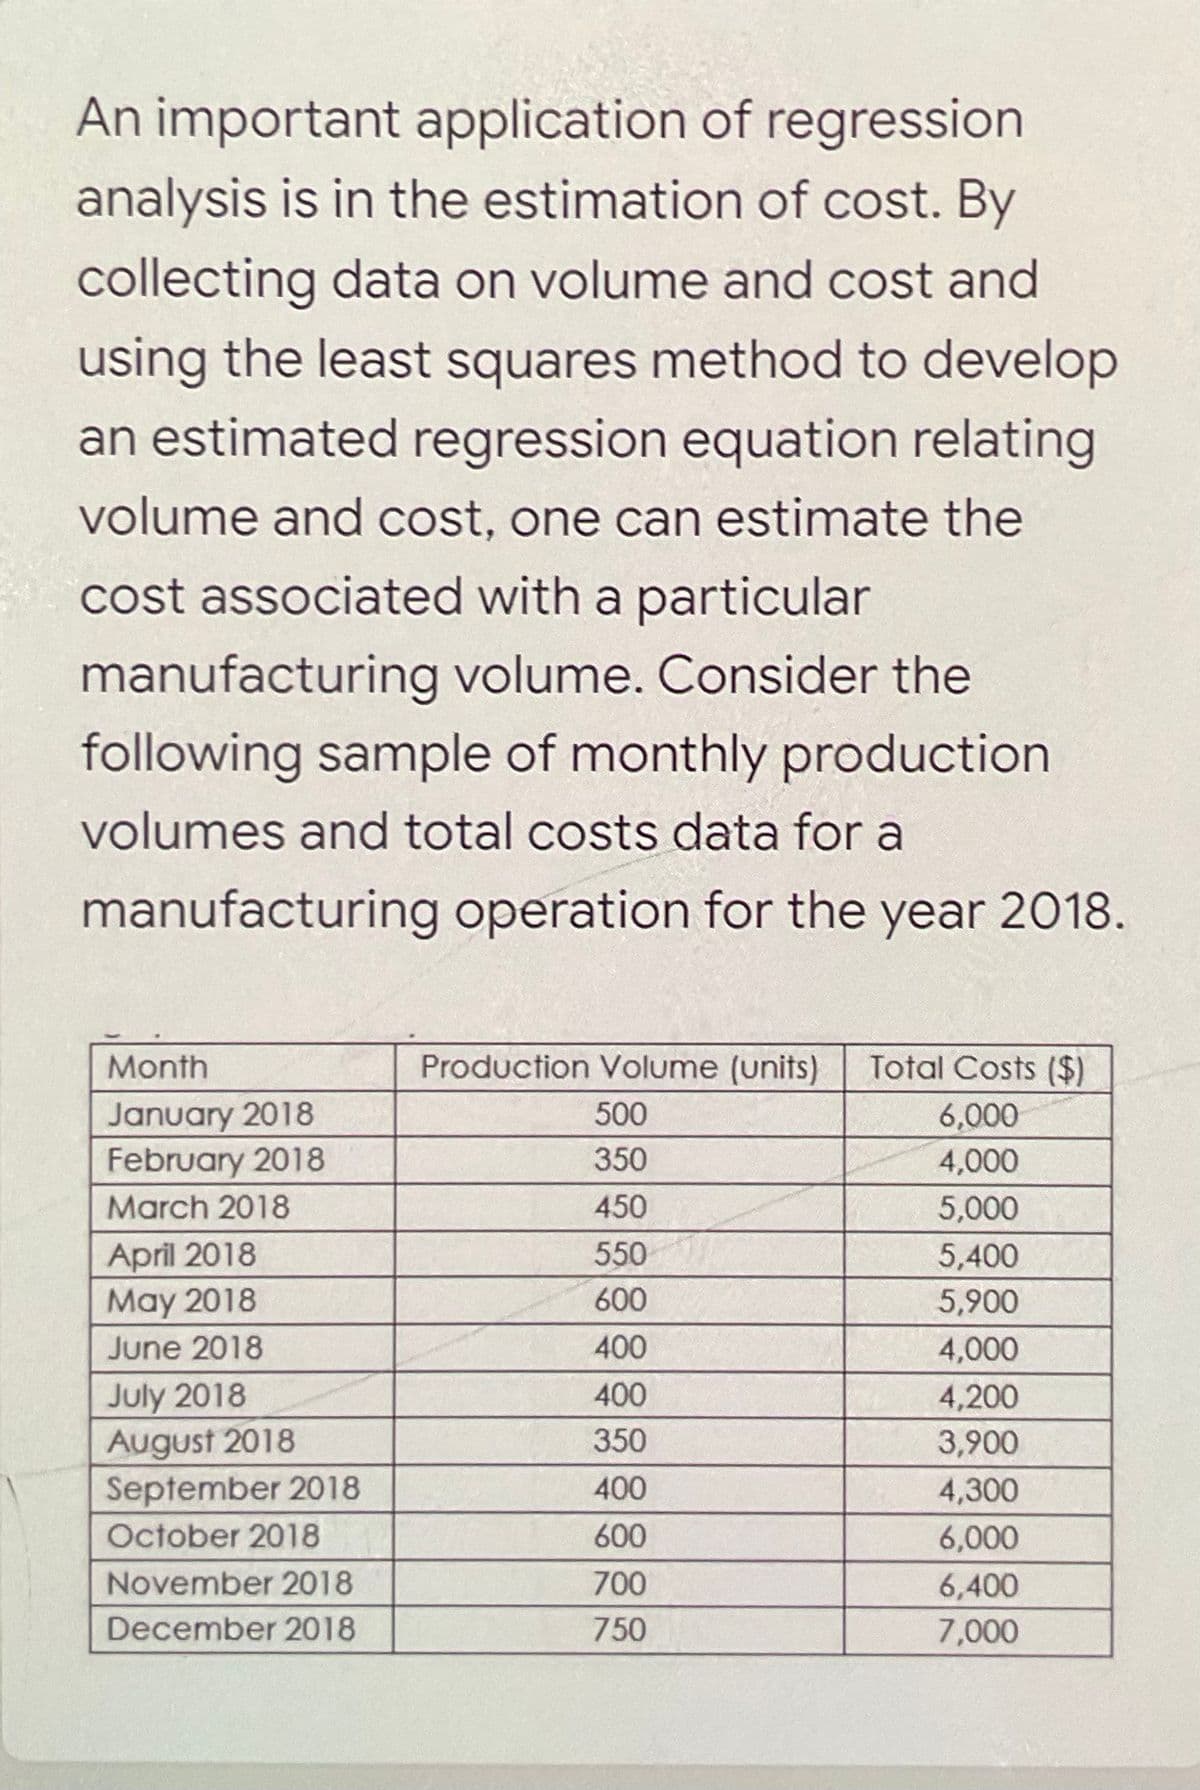 An important application of regression
analysis is in the estimation of cost. By
collecting data on volume and cost and
using the least squares method to develop
an estimated regression equation relating
volume and cost, one can estimate the
cost associated with a particular
manufacturing volume. Consider the
following sample of monthly production
volumes and total costs data for a
manufacturing operation for the year 2018.
Month
Production Volume (units)
Total Costs ($)
January 2018
February 2018
500
6,000
350
4,000
March 2018
450
5,000
April 2018
550
5,400
May 2018
600
5,900
June 2018
400
4,000
July 2018
August 2018
September 2018
400
4,200
350
3,900
400
4,300
October 2018
600
6,000
November 2018
700
6,400
December 2018
750
7,000
